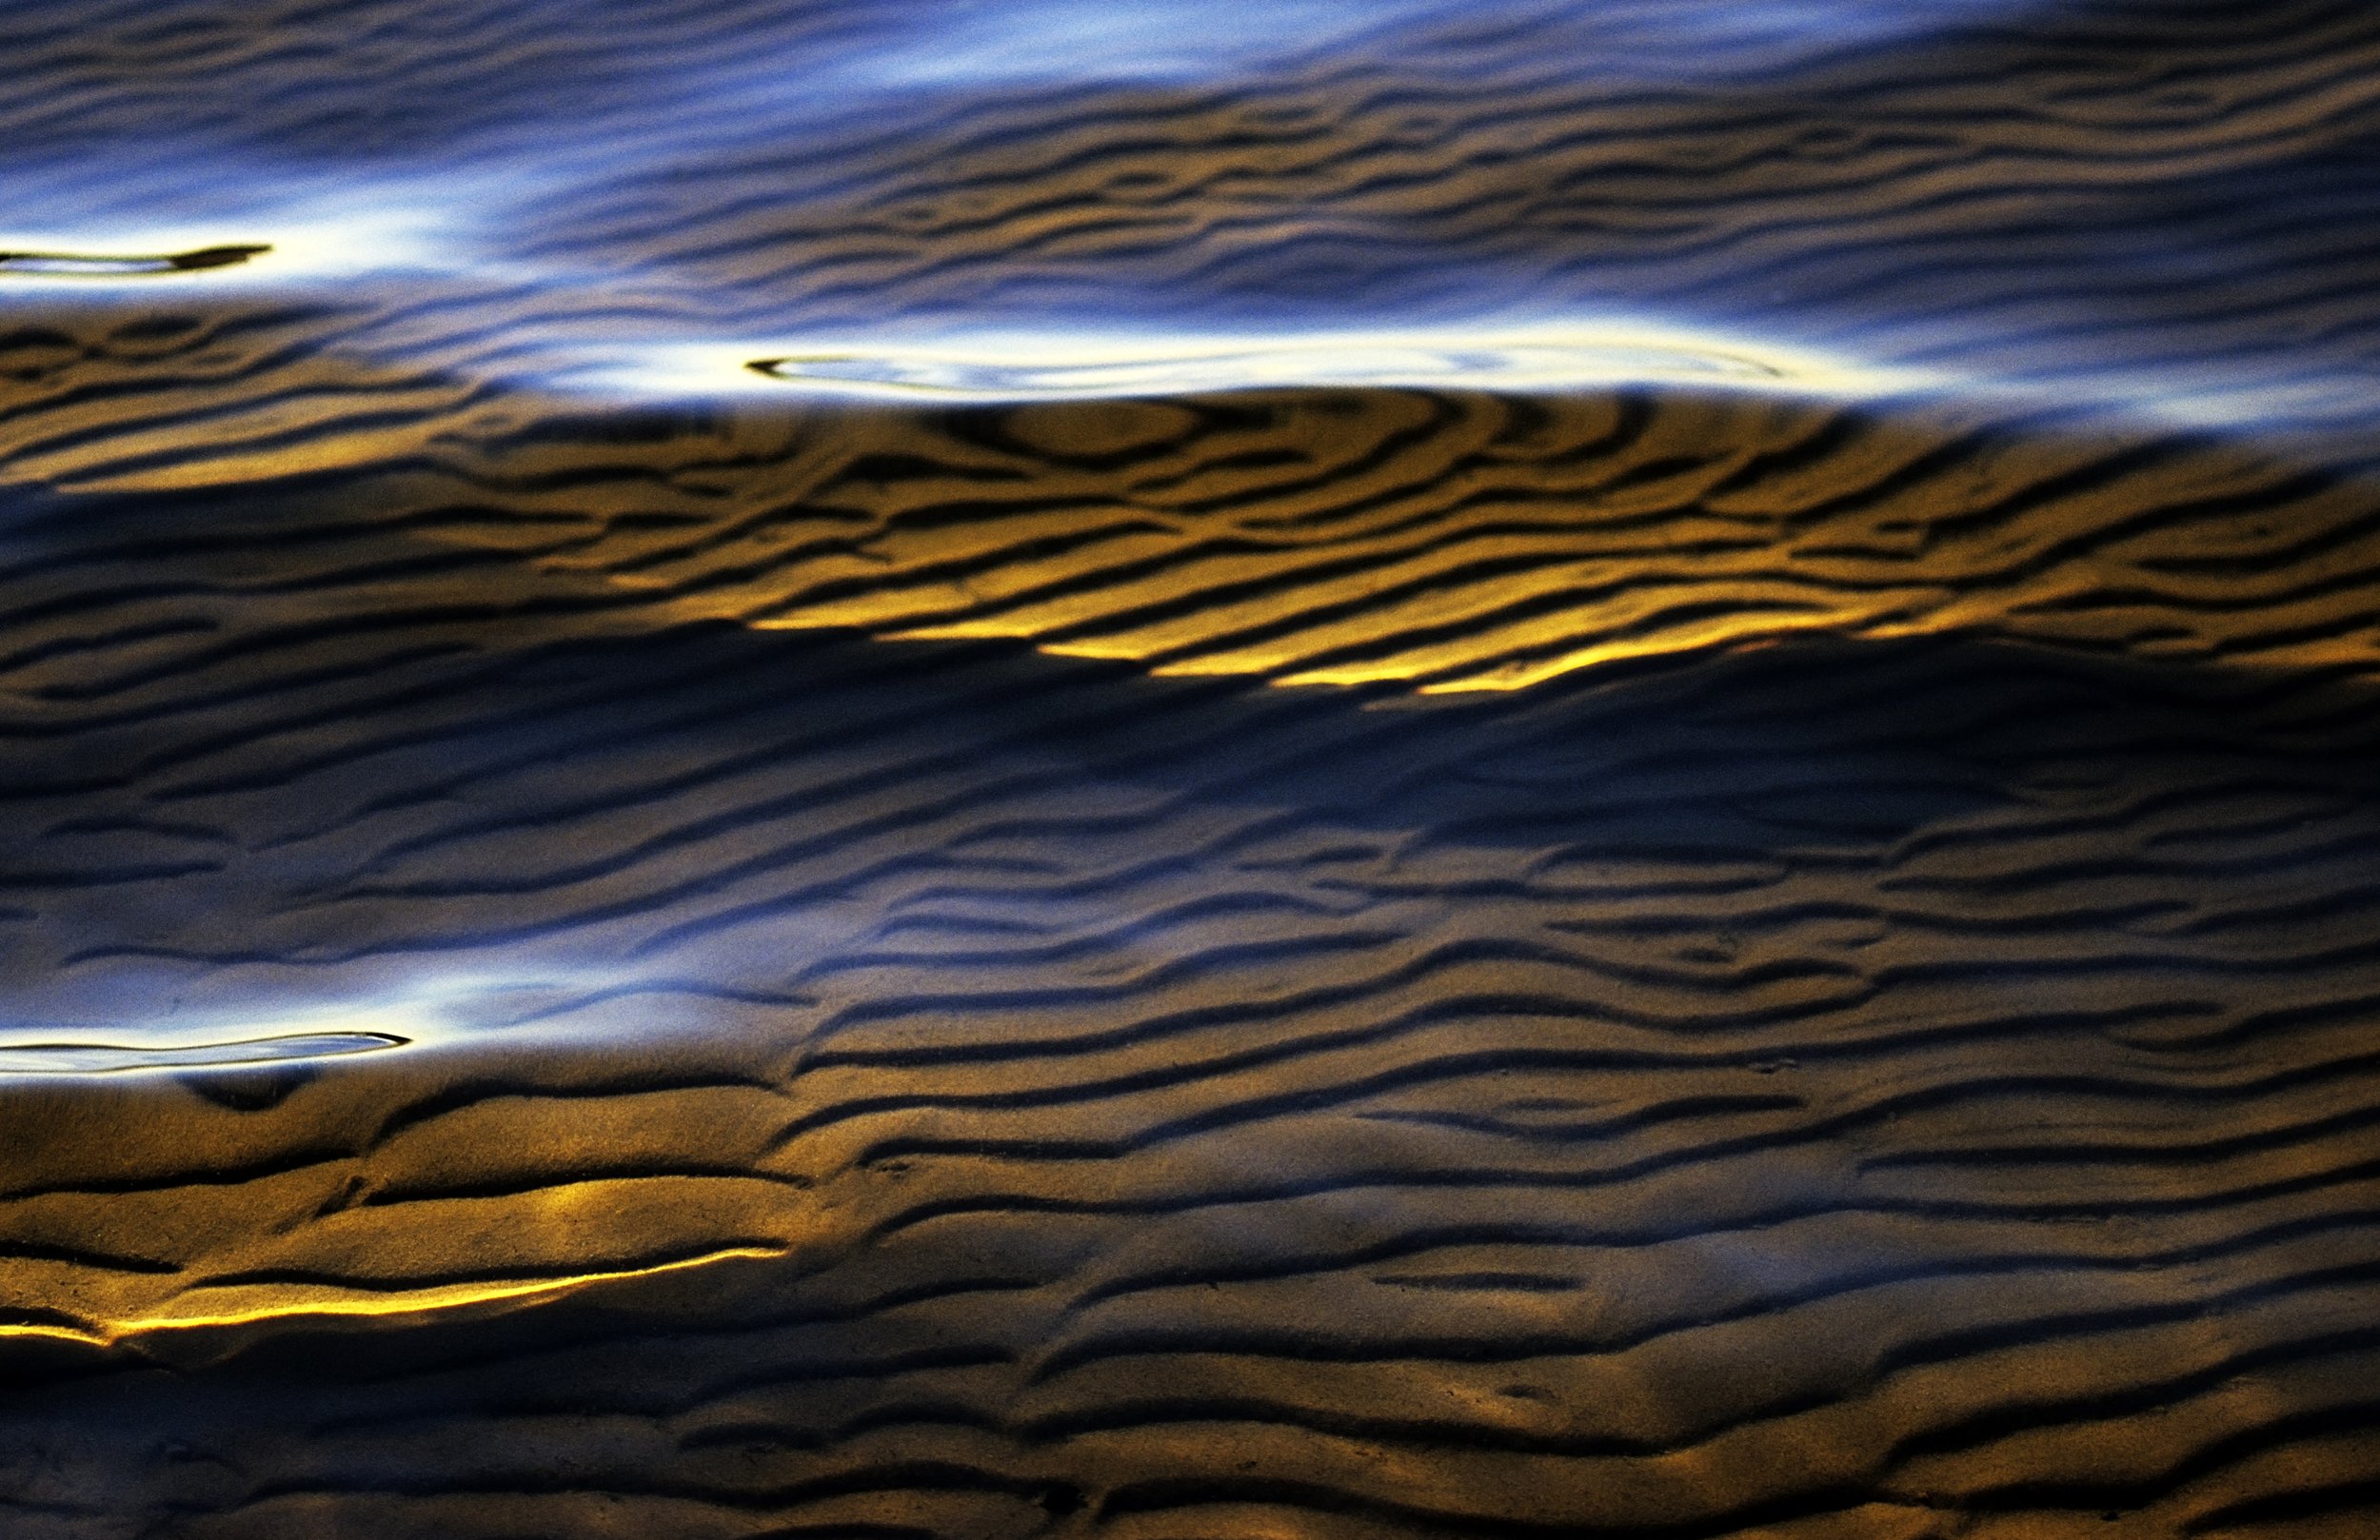 ripples in sand and sun enhance monochromatic contrast reduce noise 7 35 60 0 BLOW UP 11X17.jpg